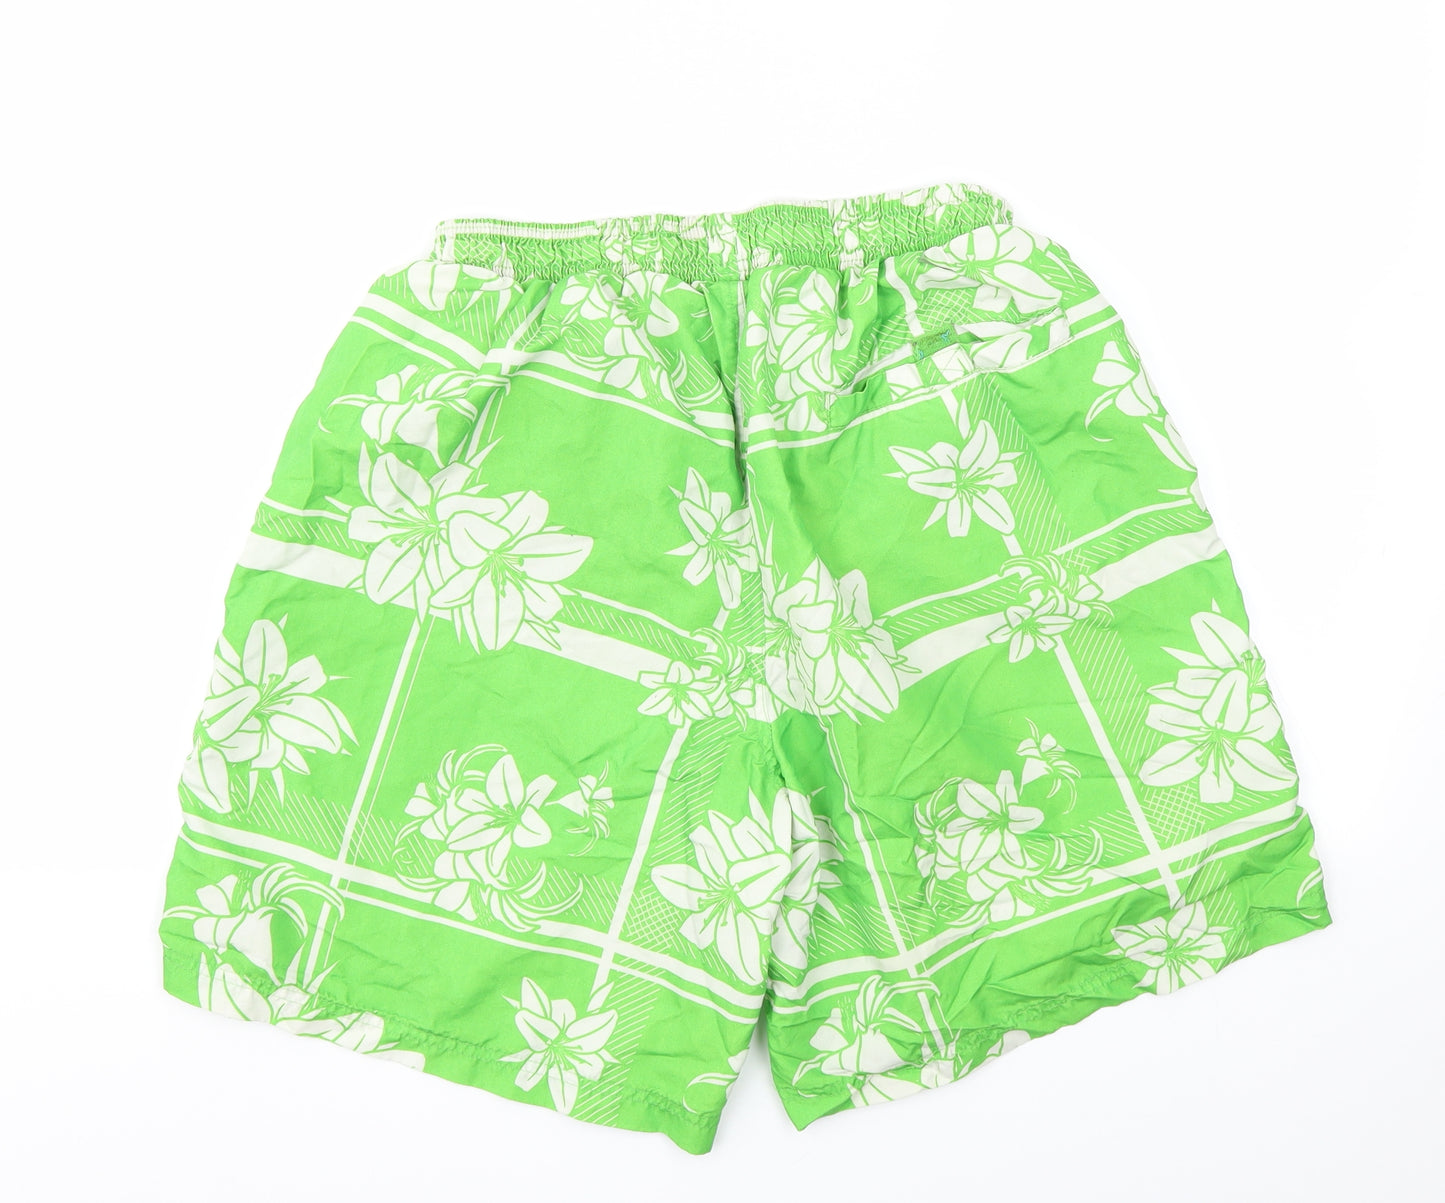 Op Mens Green Floral  Sweat Shorts Size L - Stretch waistband